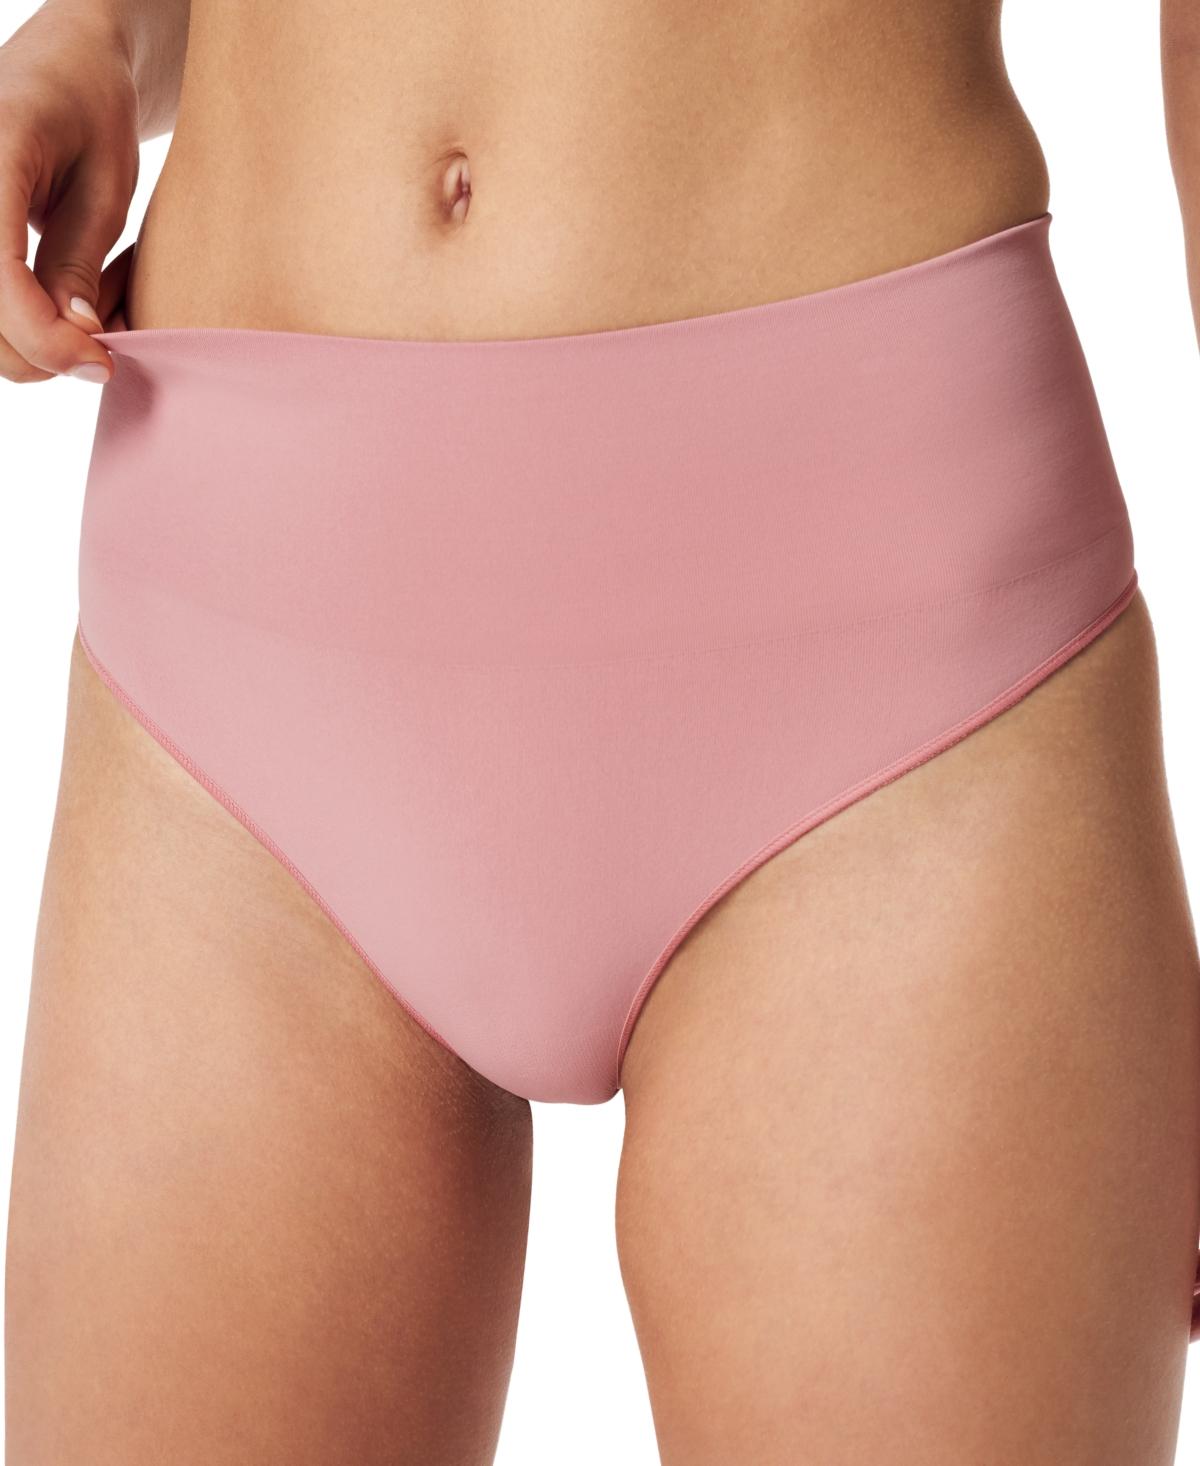 Spanx Ecocare Shaping Thong Underwear 40048r in Pink